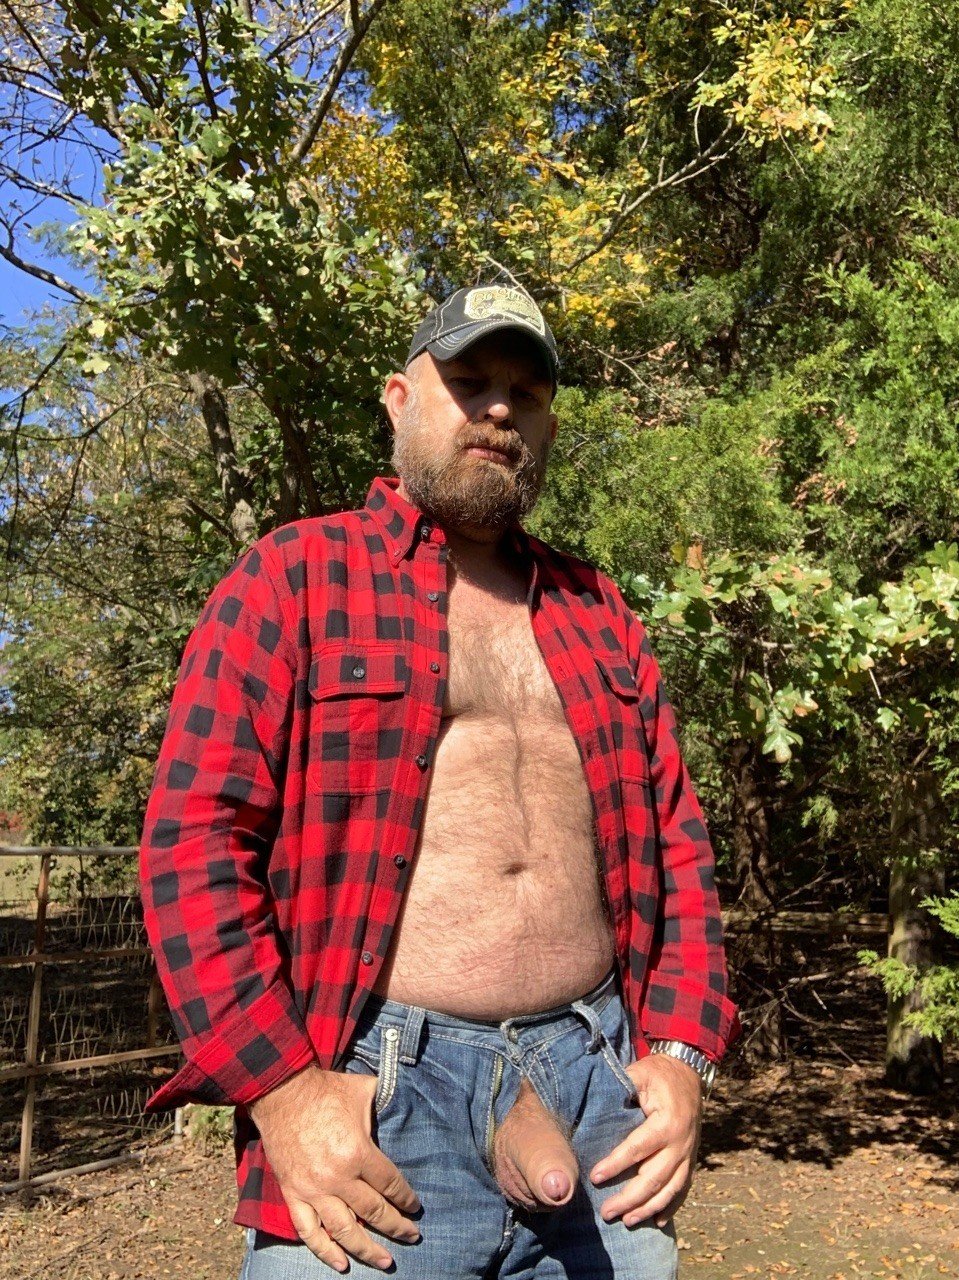 Watch the Photo by Beards-n-Foreskin with the username @Beards-n-Foreskin, posted on January 9, 2019